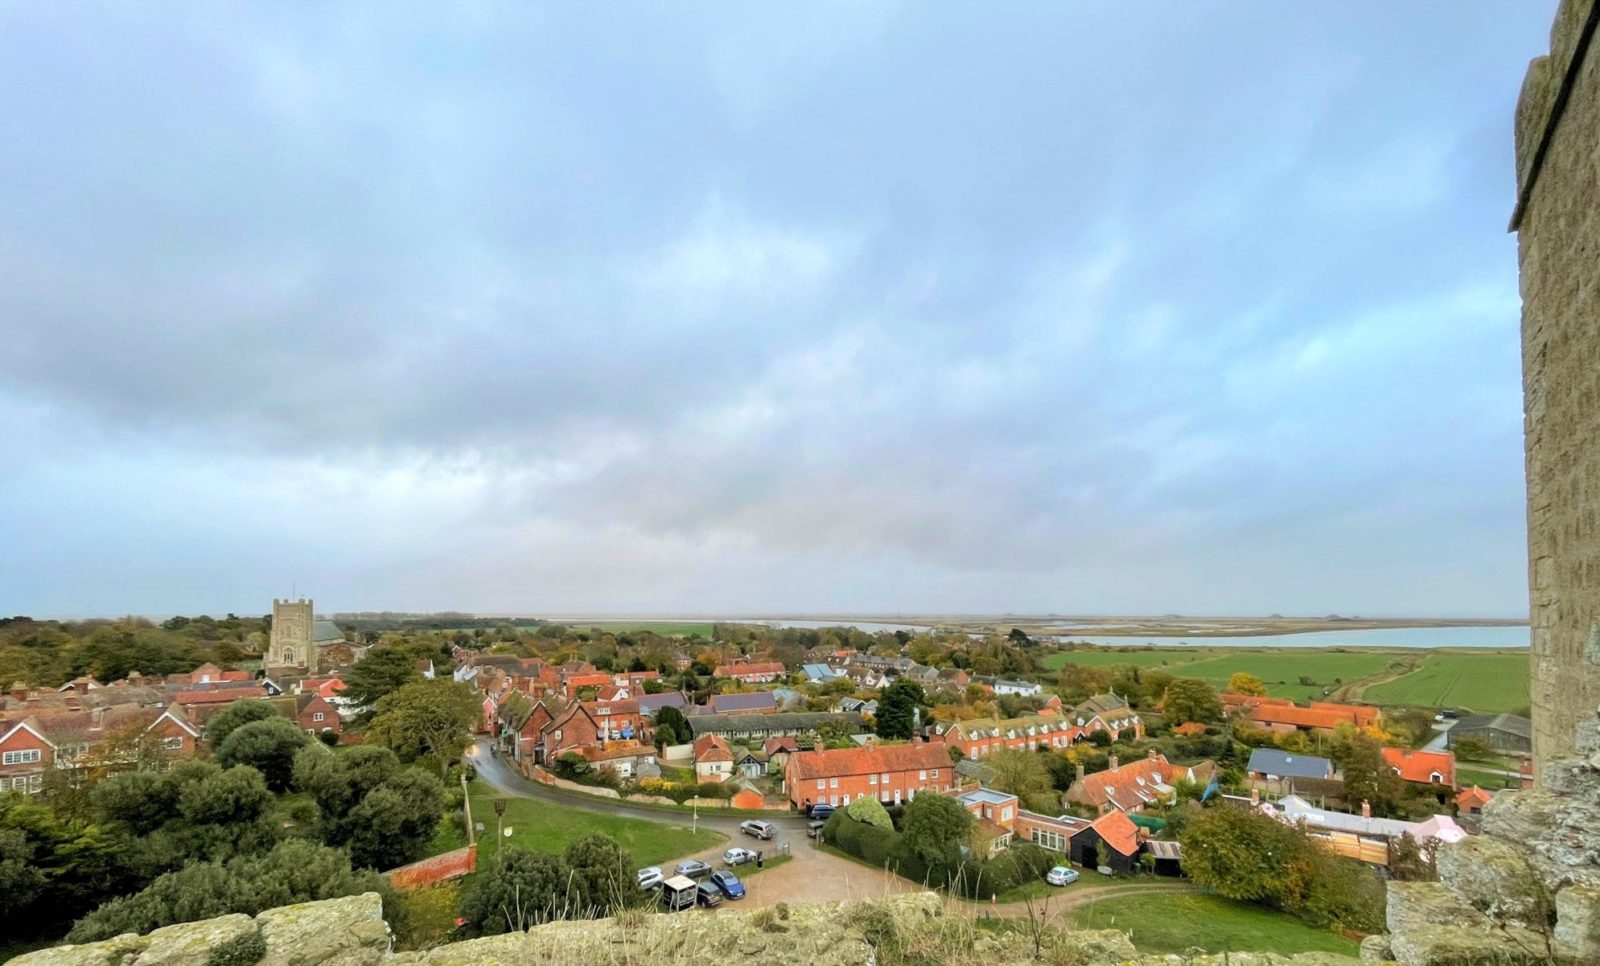 Views of Orford